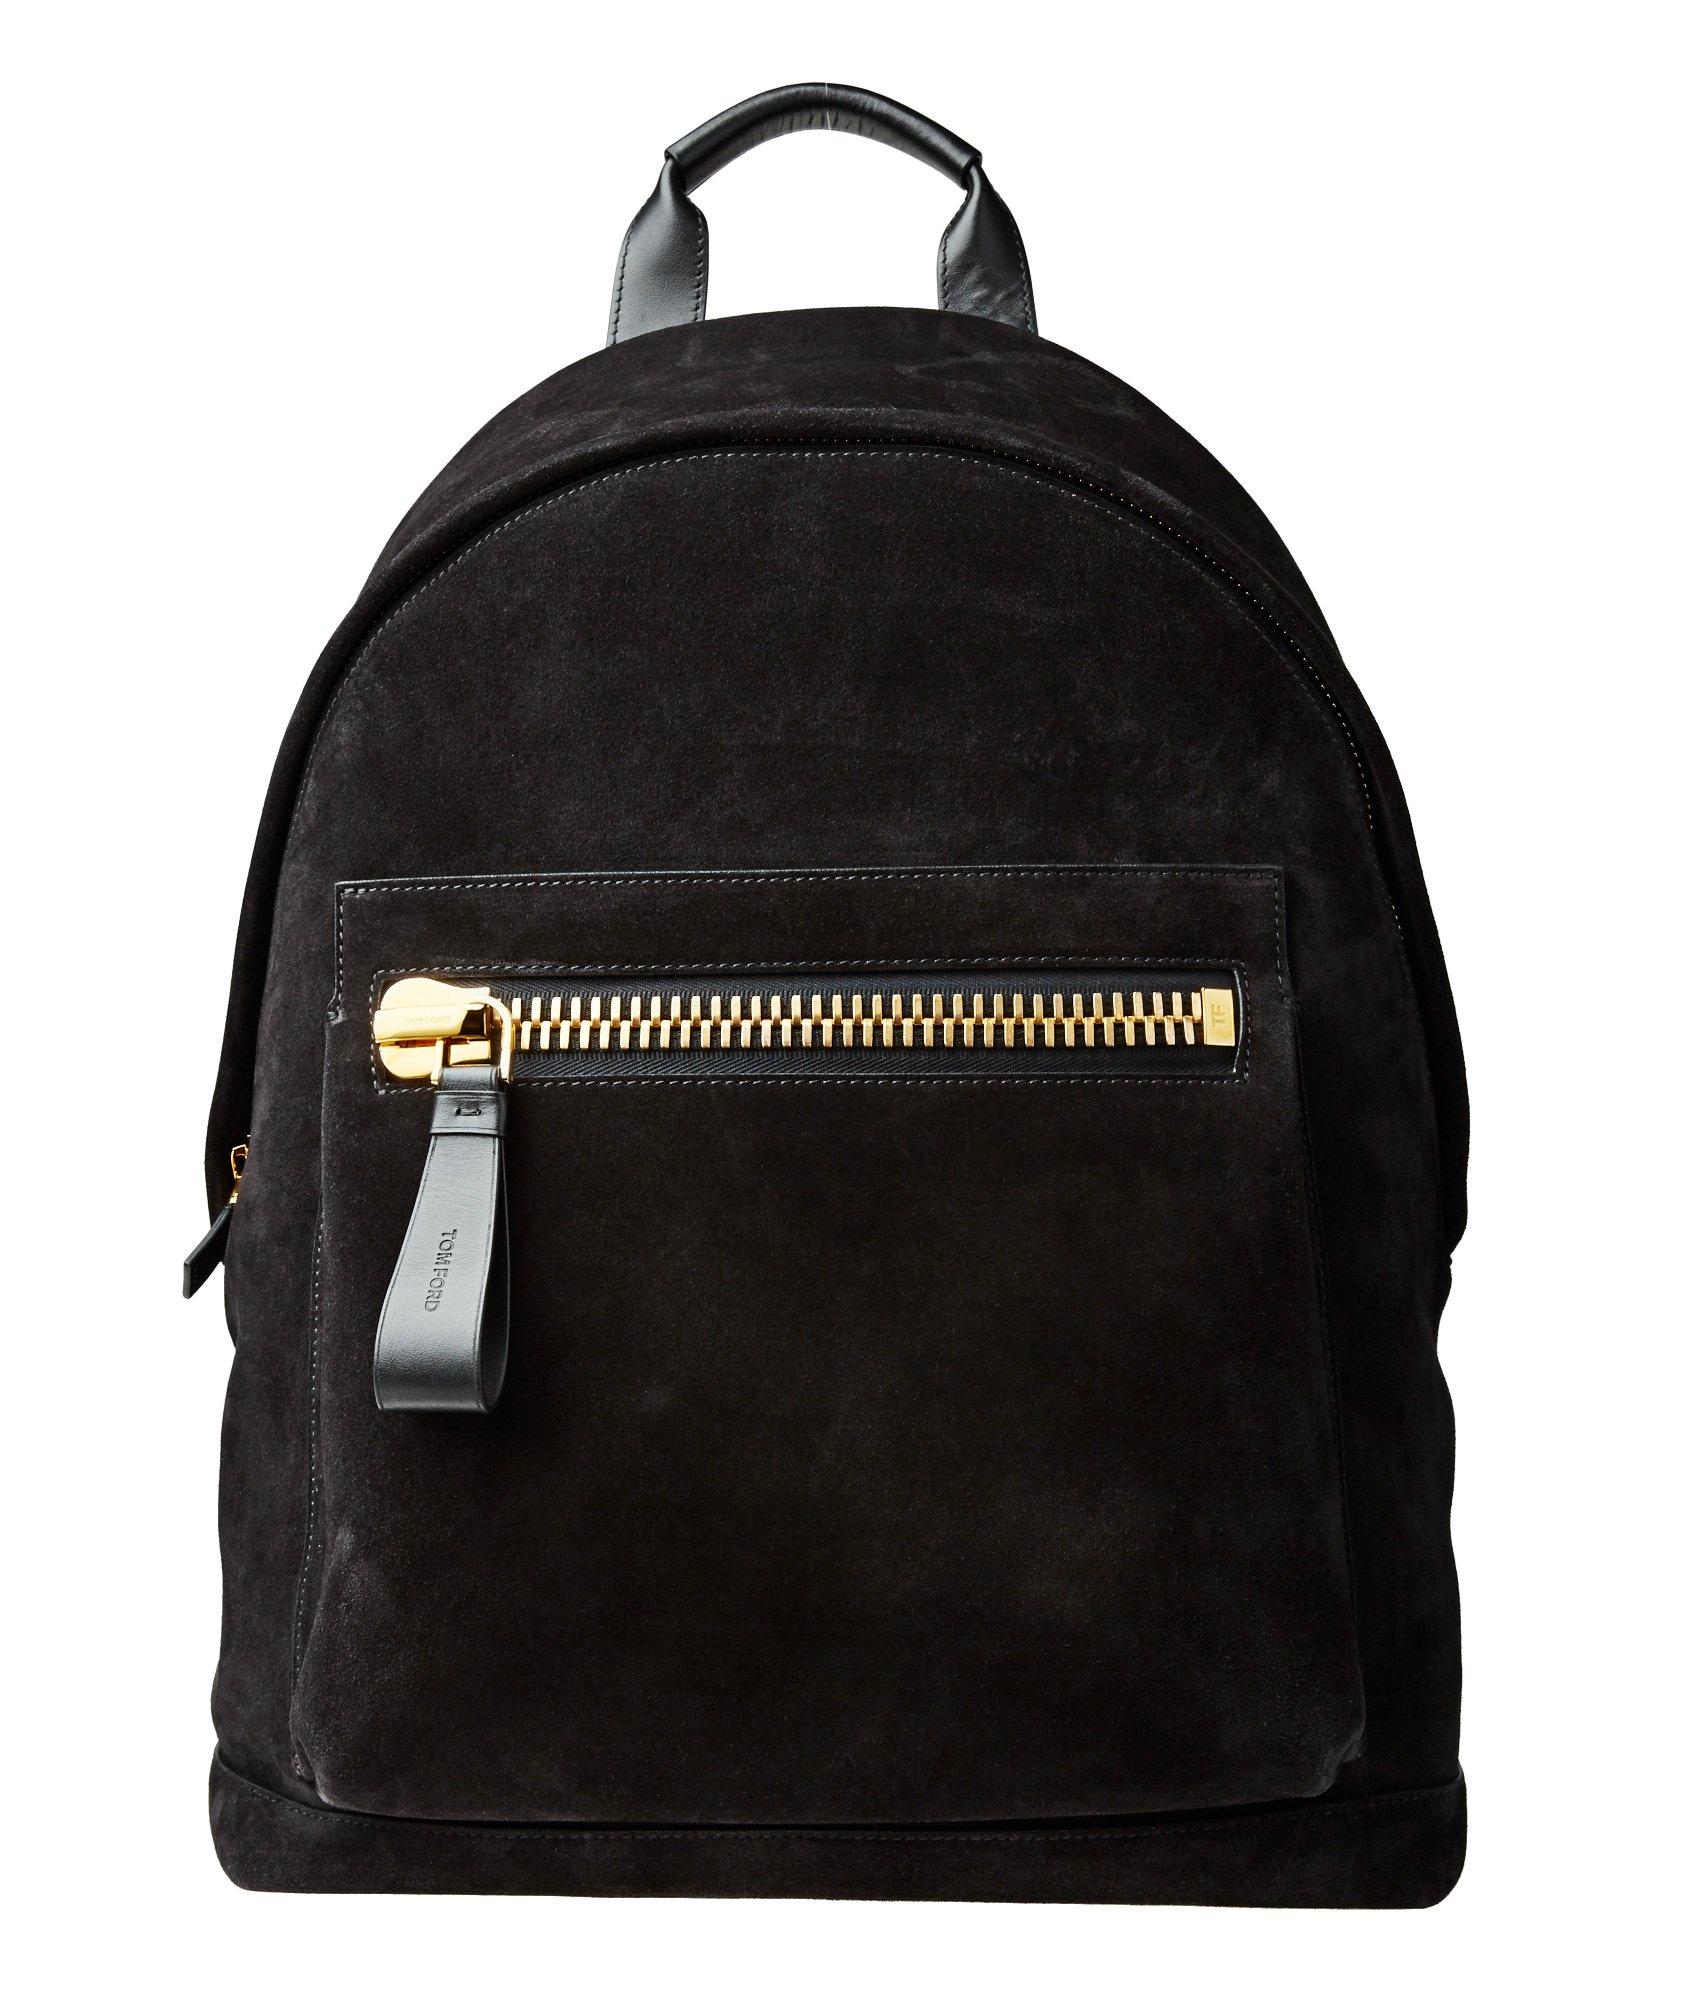 Buckley Leather Backpack image 0